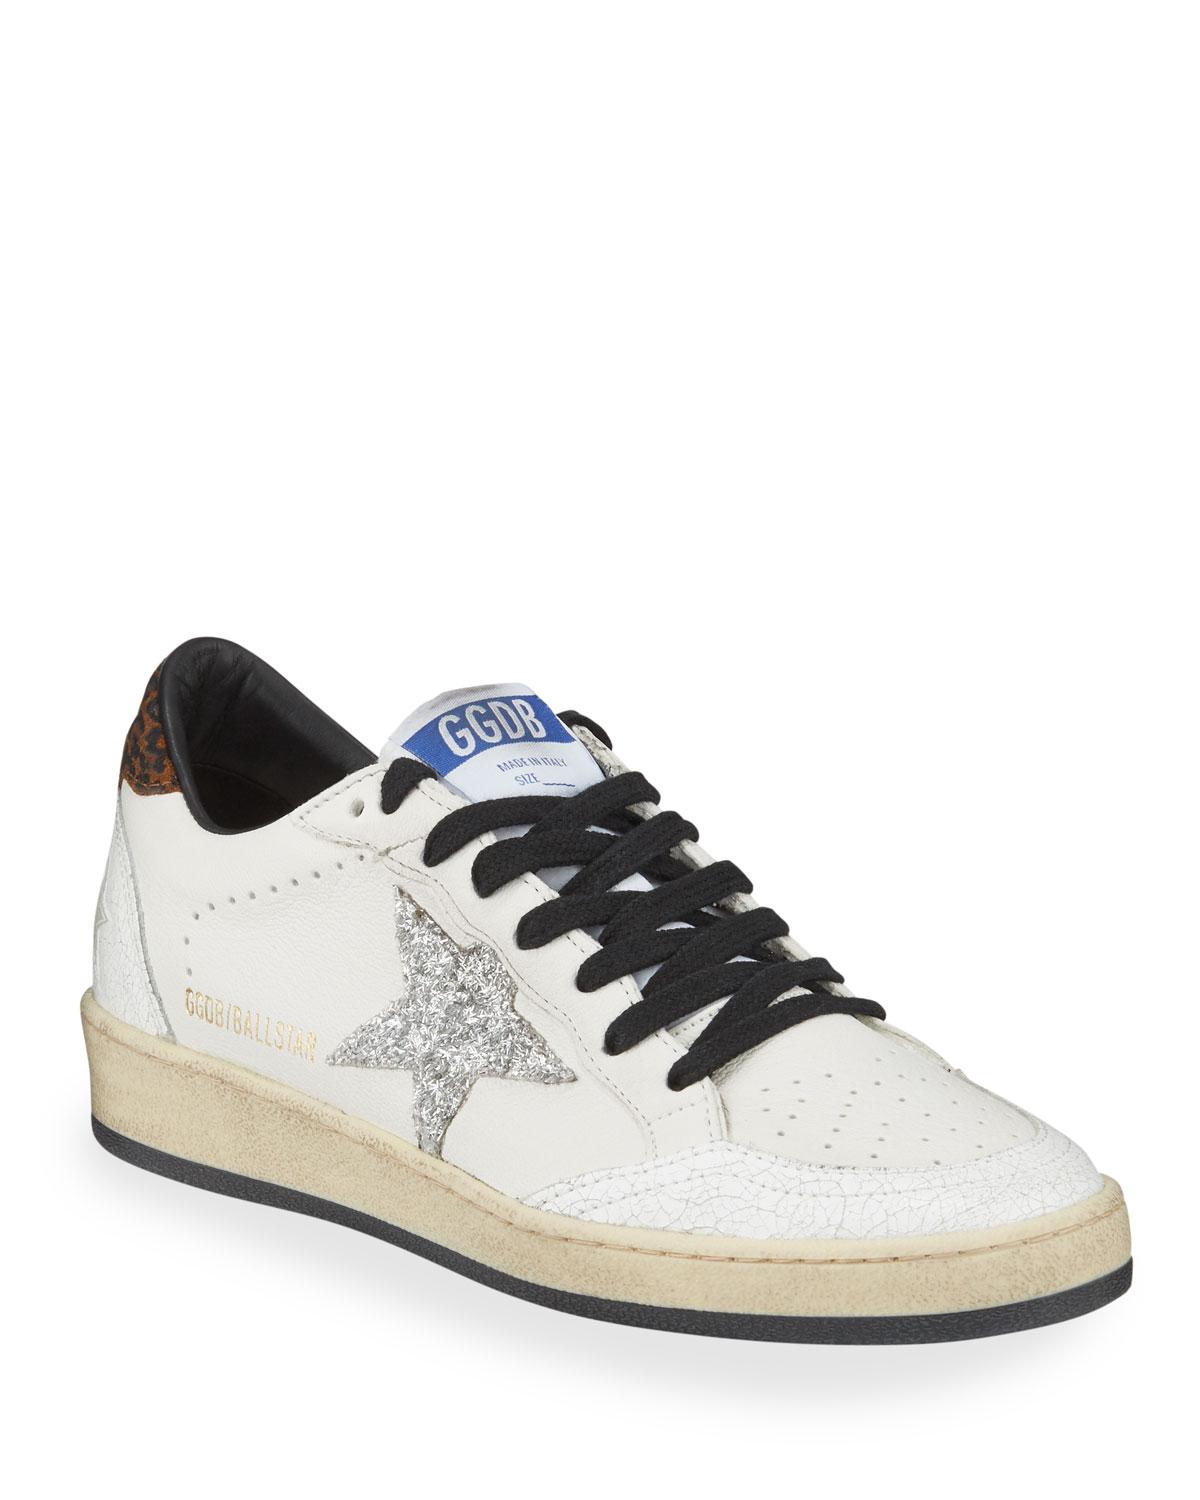 Golden Goose Deluxe Brand Ball Star Lace-up Distressed Leather Sneakers